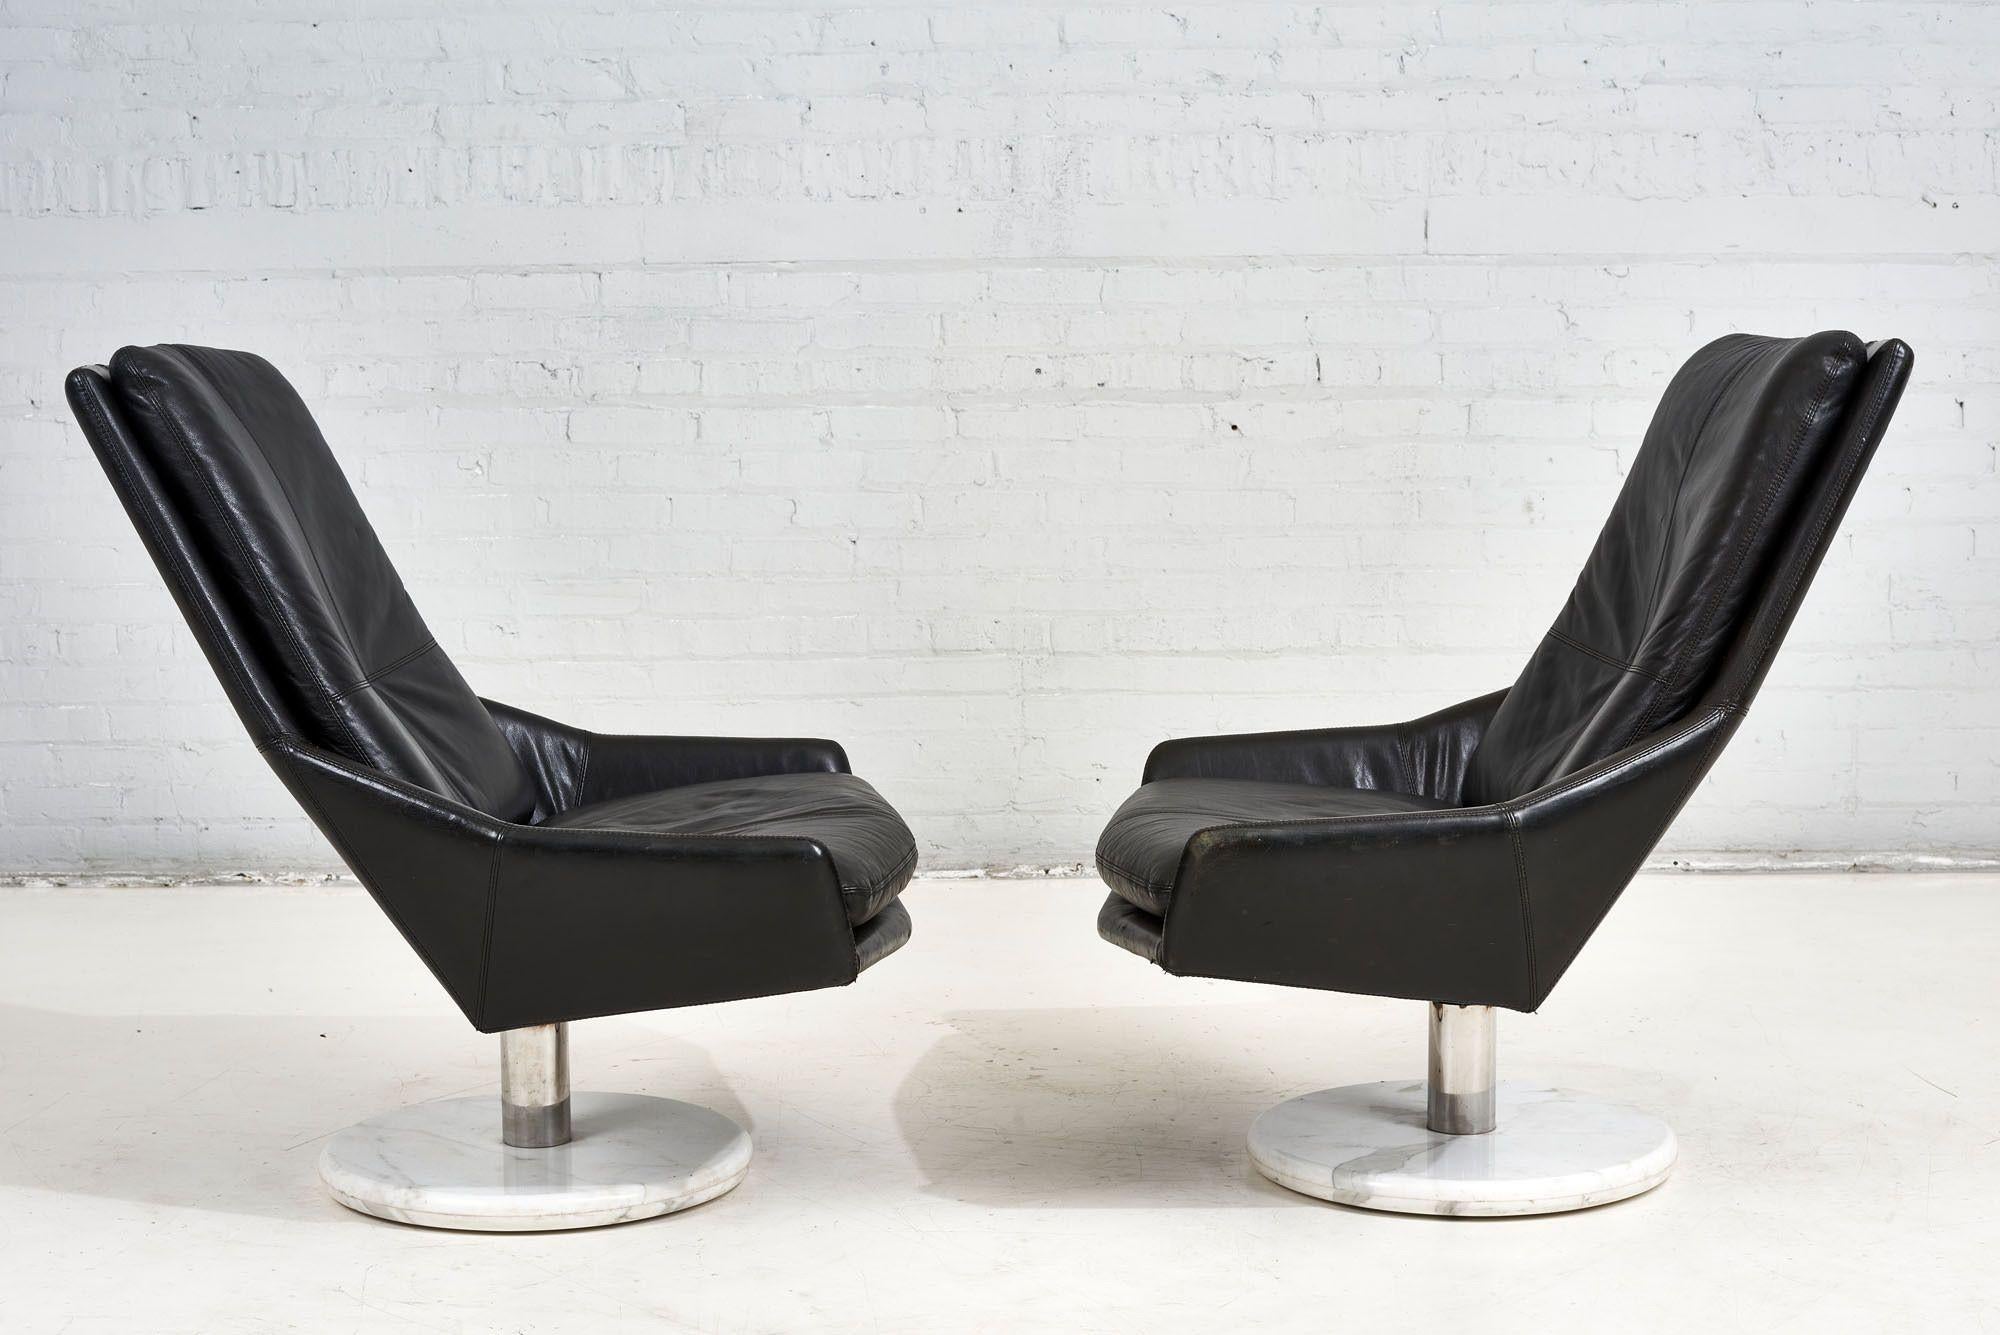 Late 20th Century Black Leather Lounge Chairs with Calacutta Marble Bases, 1970 For Sale